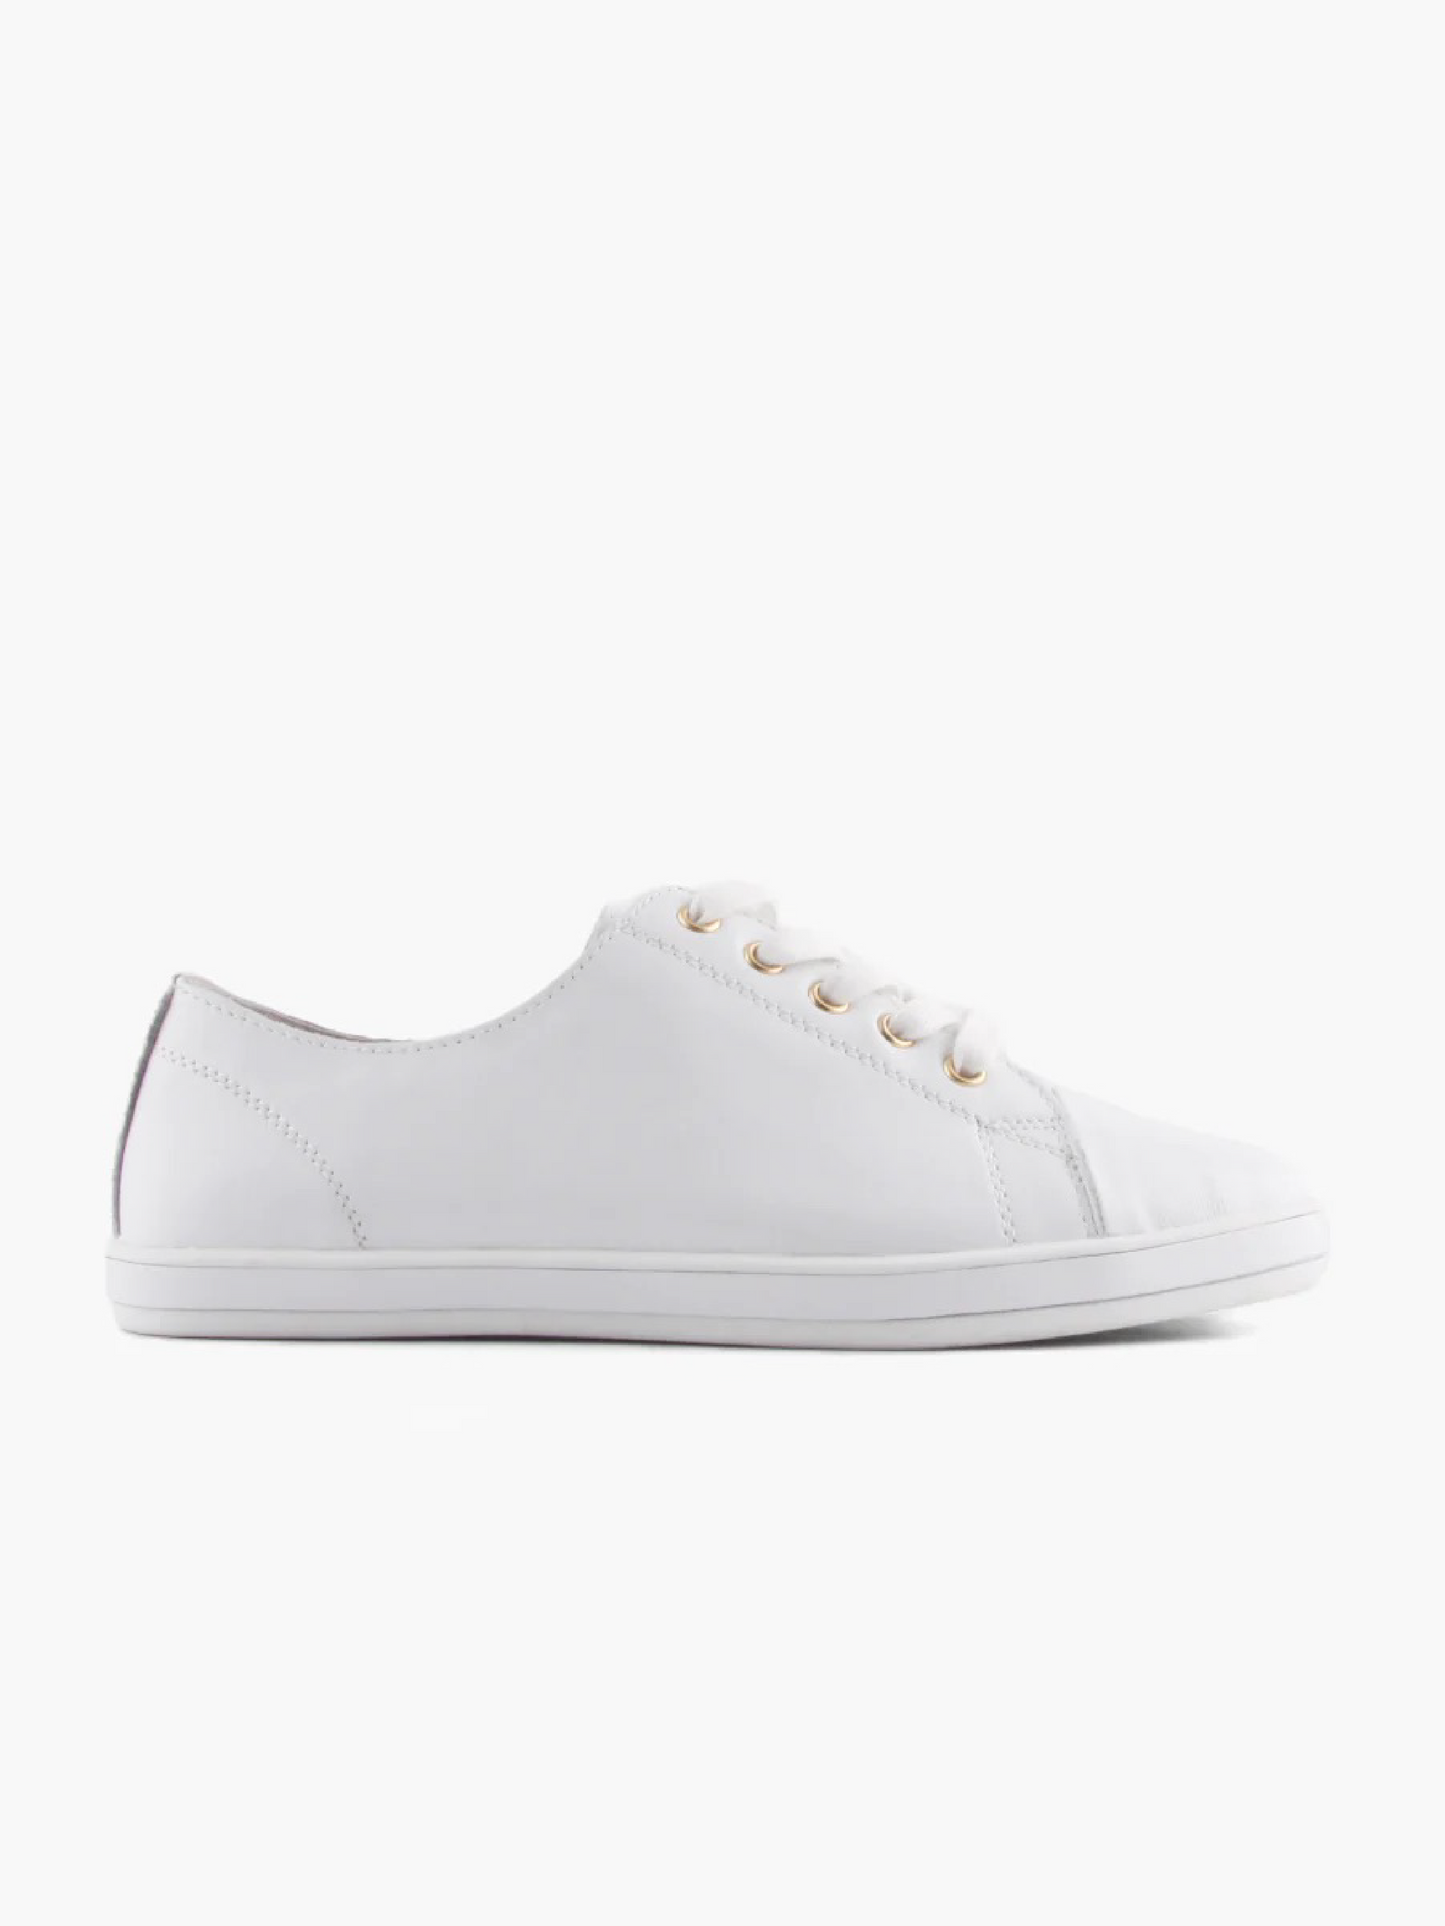 Alfie & Evie Greenie Leather Lightweight Lace Up Sneaker - White